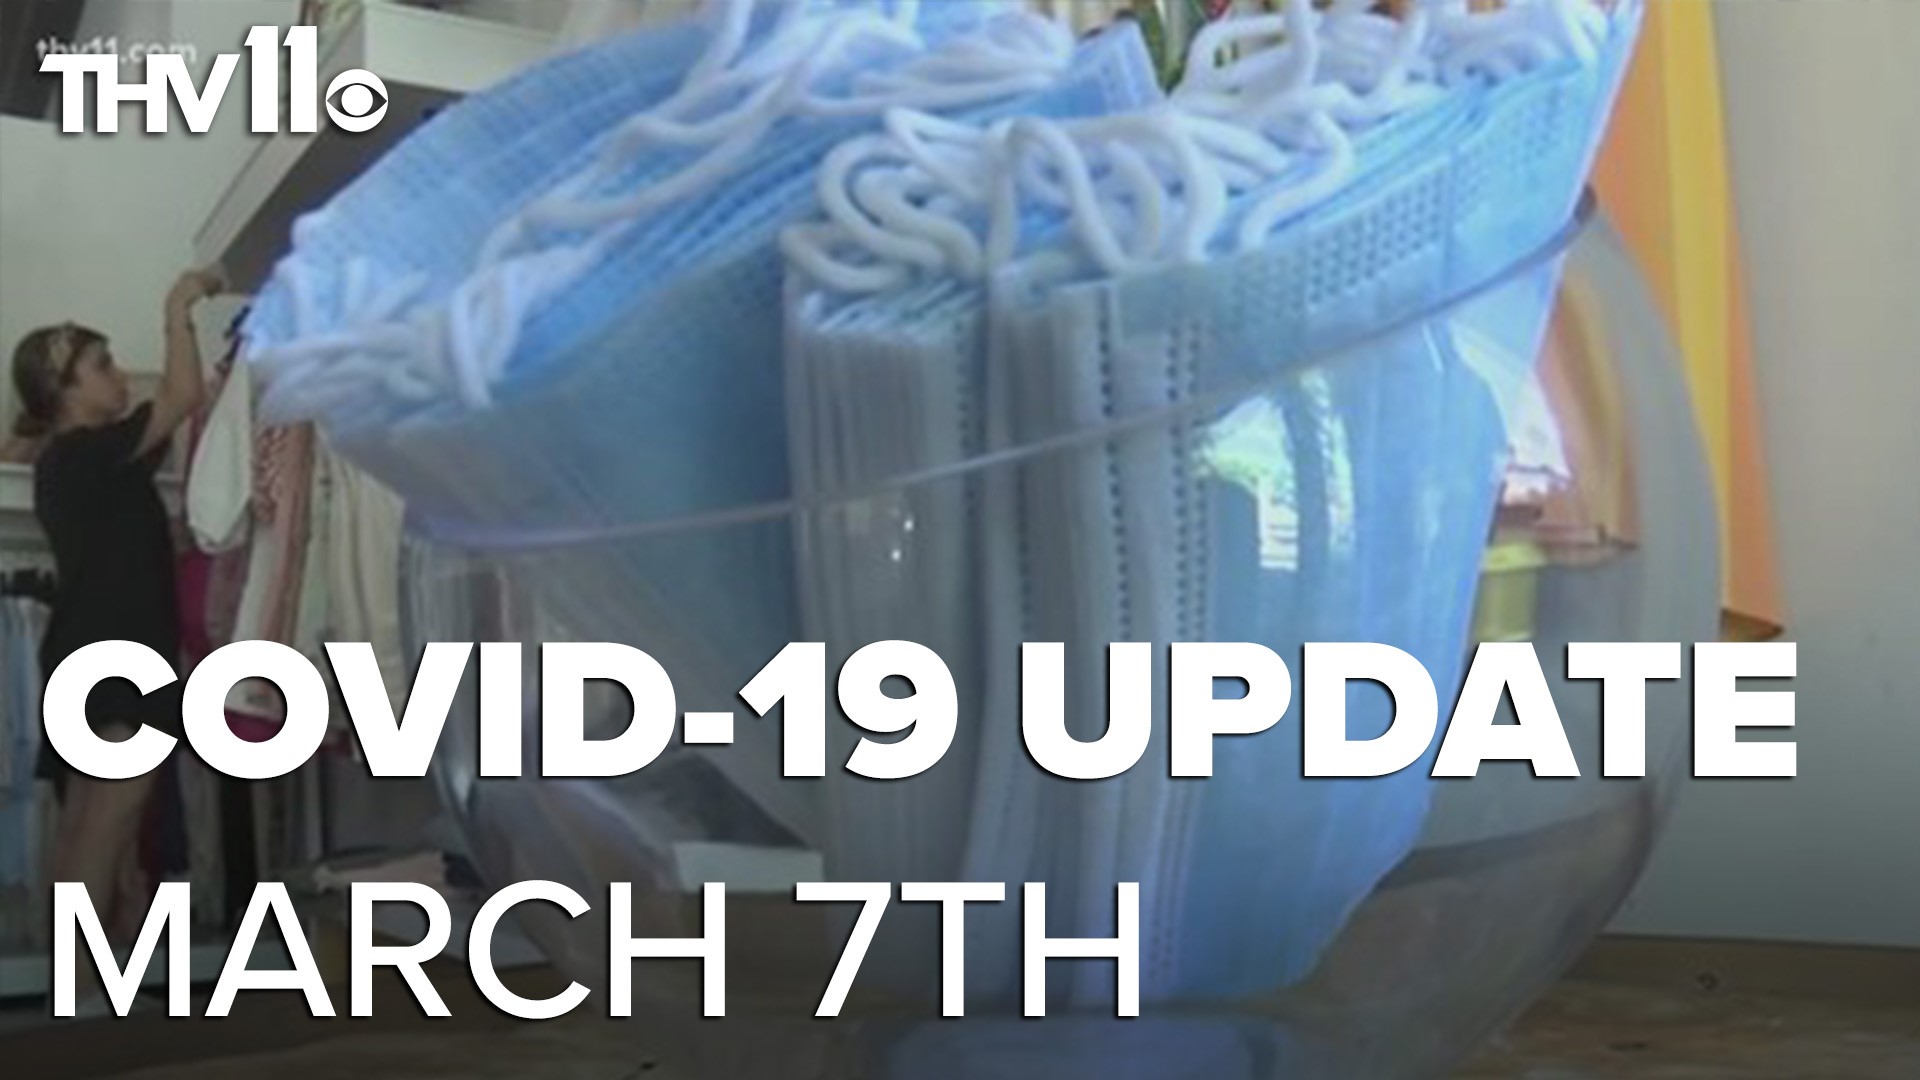 After the decline in virus testing following severe winter weather in Arkansas, COVID-19 numbers have begun to rise again.